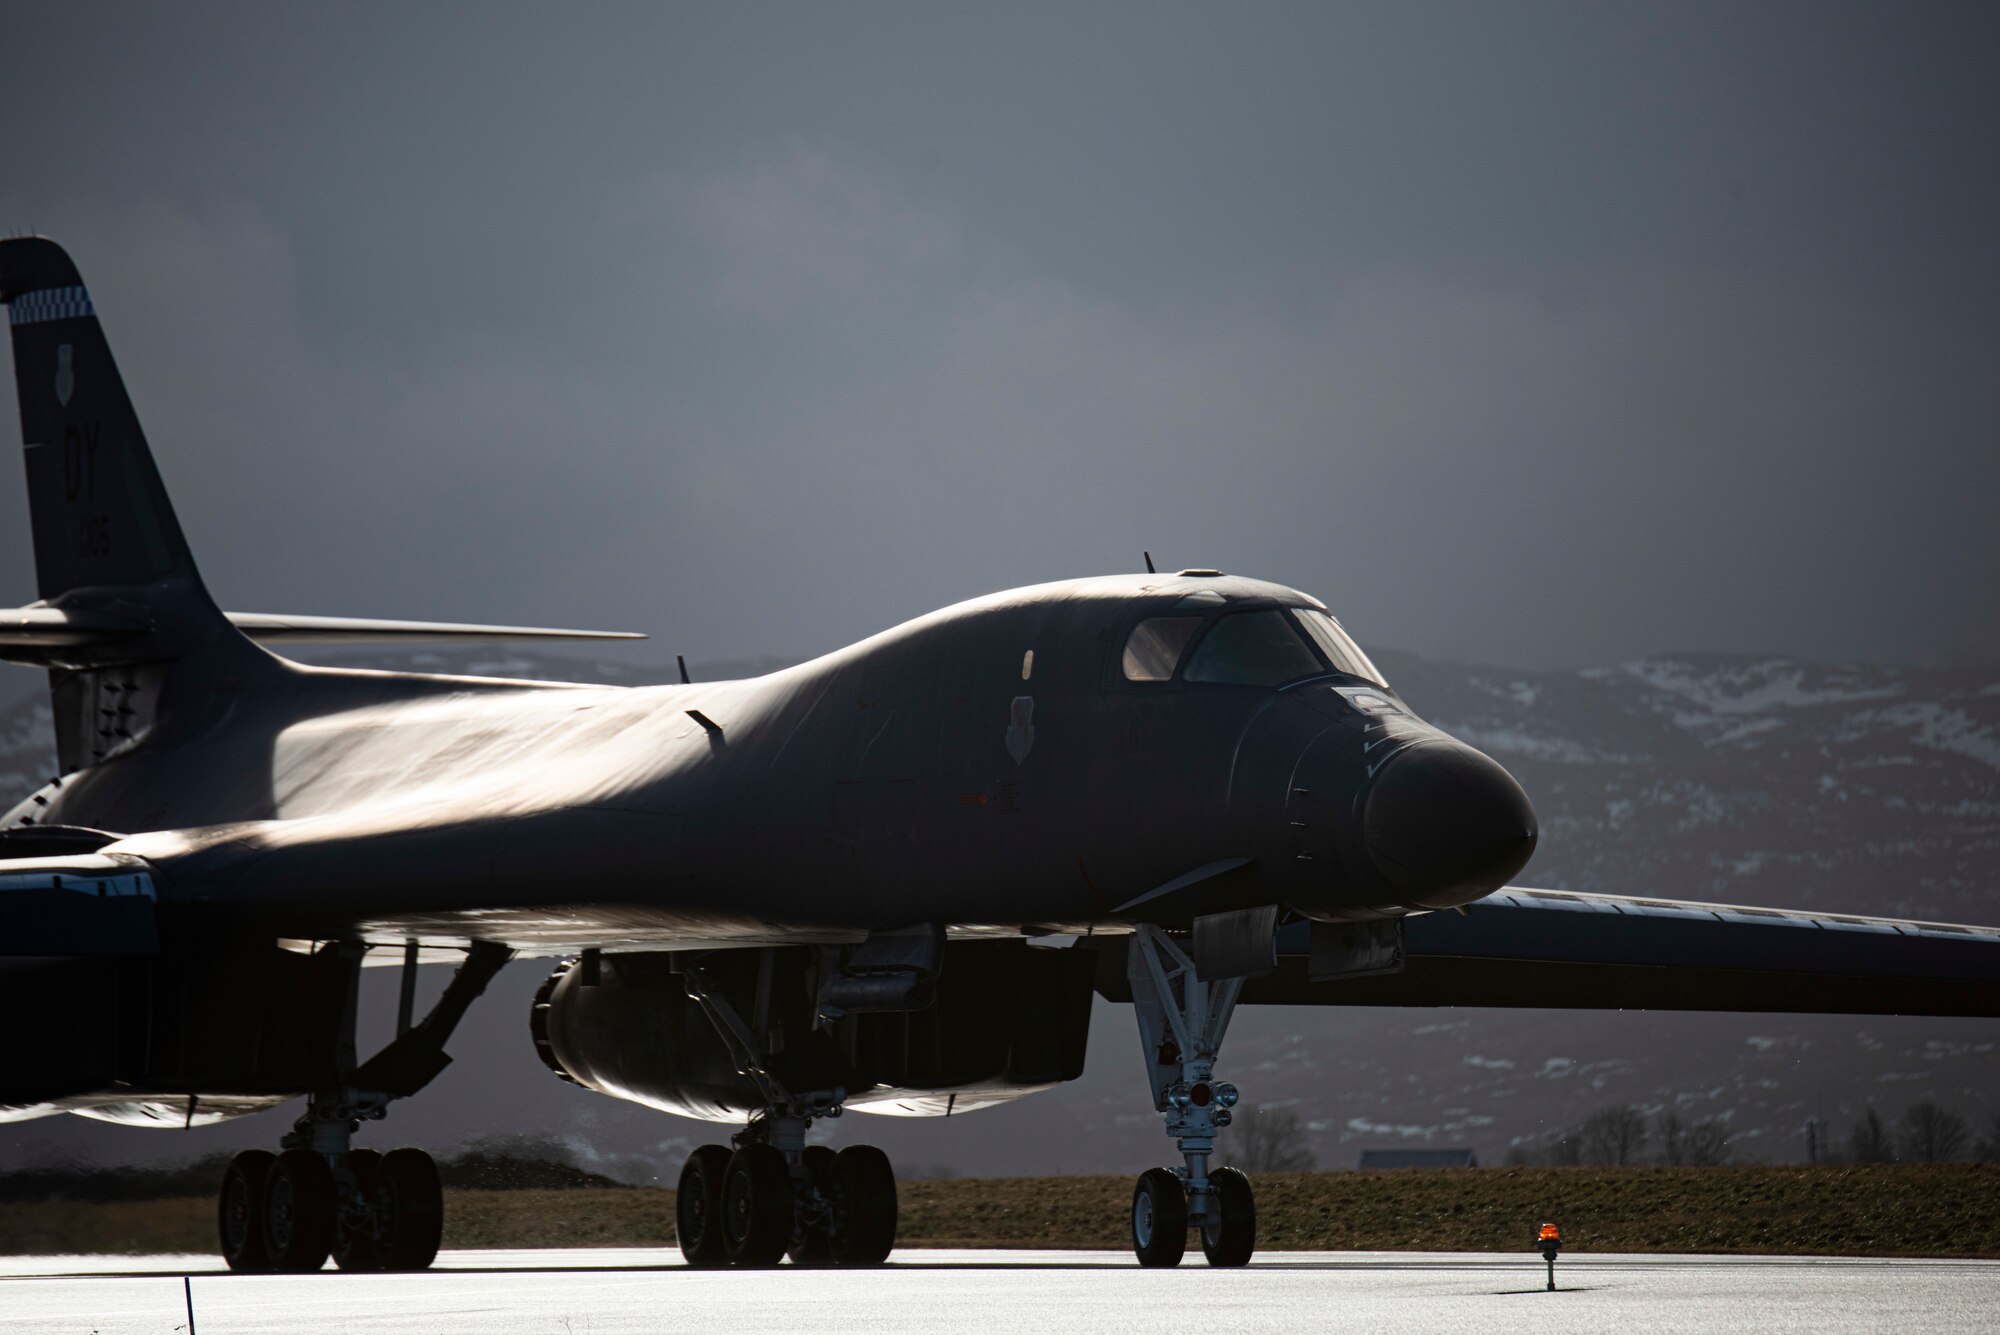 A B-1B Lancer assigned to the 9th Expeditionary Bomb Squadron taxis on the flightline at Ørland Air Force Station, Norway, Feb. 26, 2021. During Arctic Bone, two B-1’s conducted local integration training with a U.S. Navy P-8 Poseidon, a Royal Norwegian air force F-35 Lightning and a Royal Norwegian navy Skjold-class Corvette ship. (U.S. Air Force photo by Airman 1st Class Colin Hollowell)